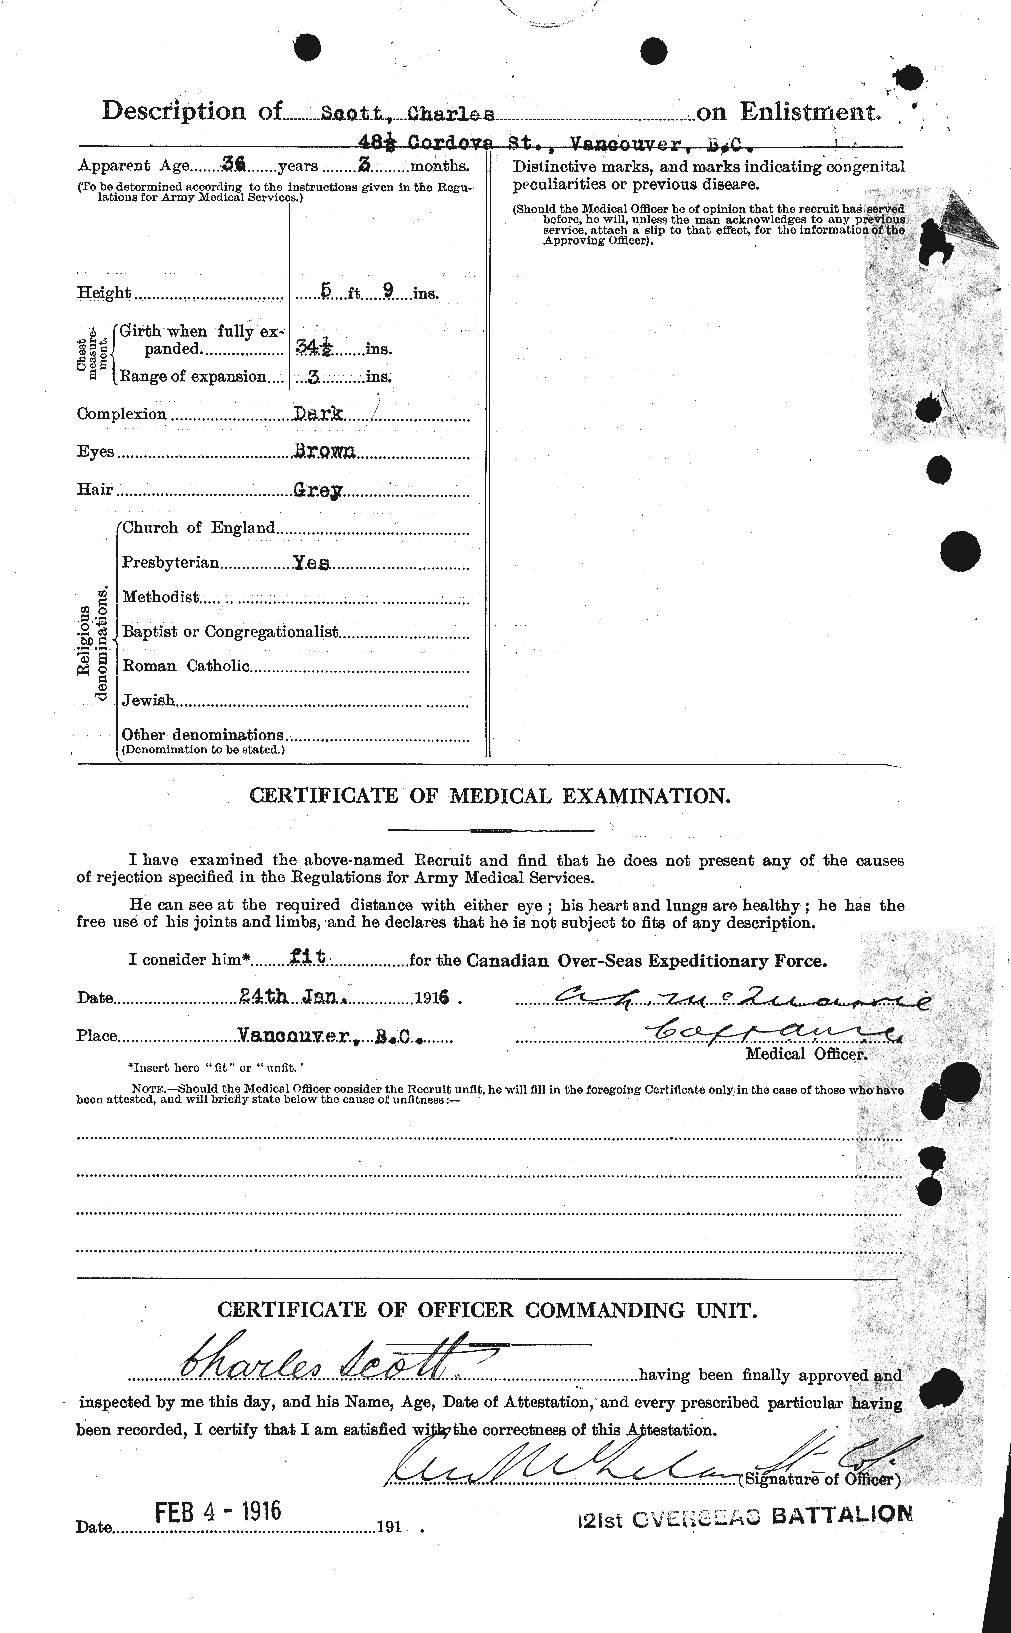 Personnel Records of the First World War - CEF 086190b